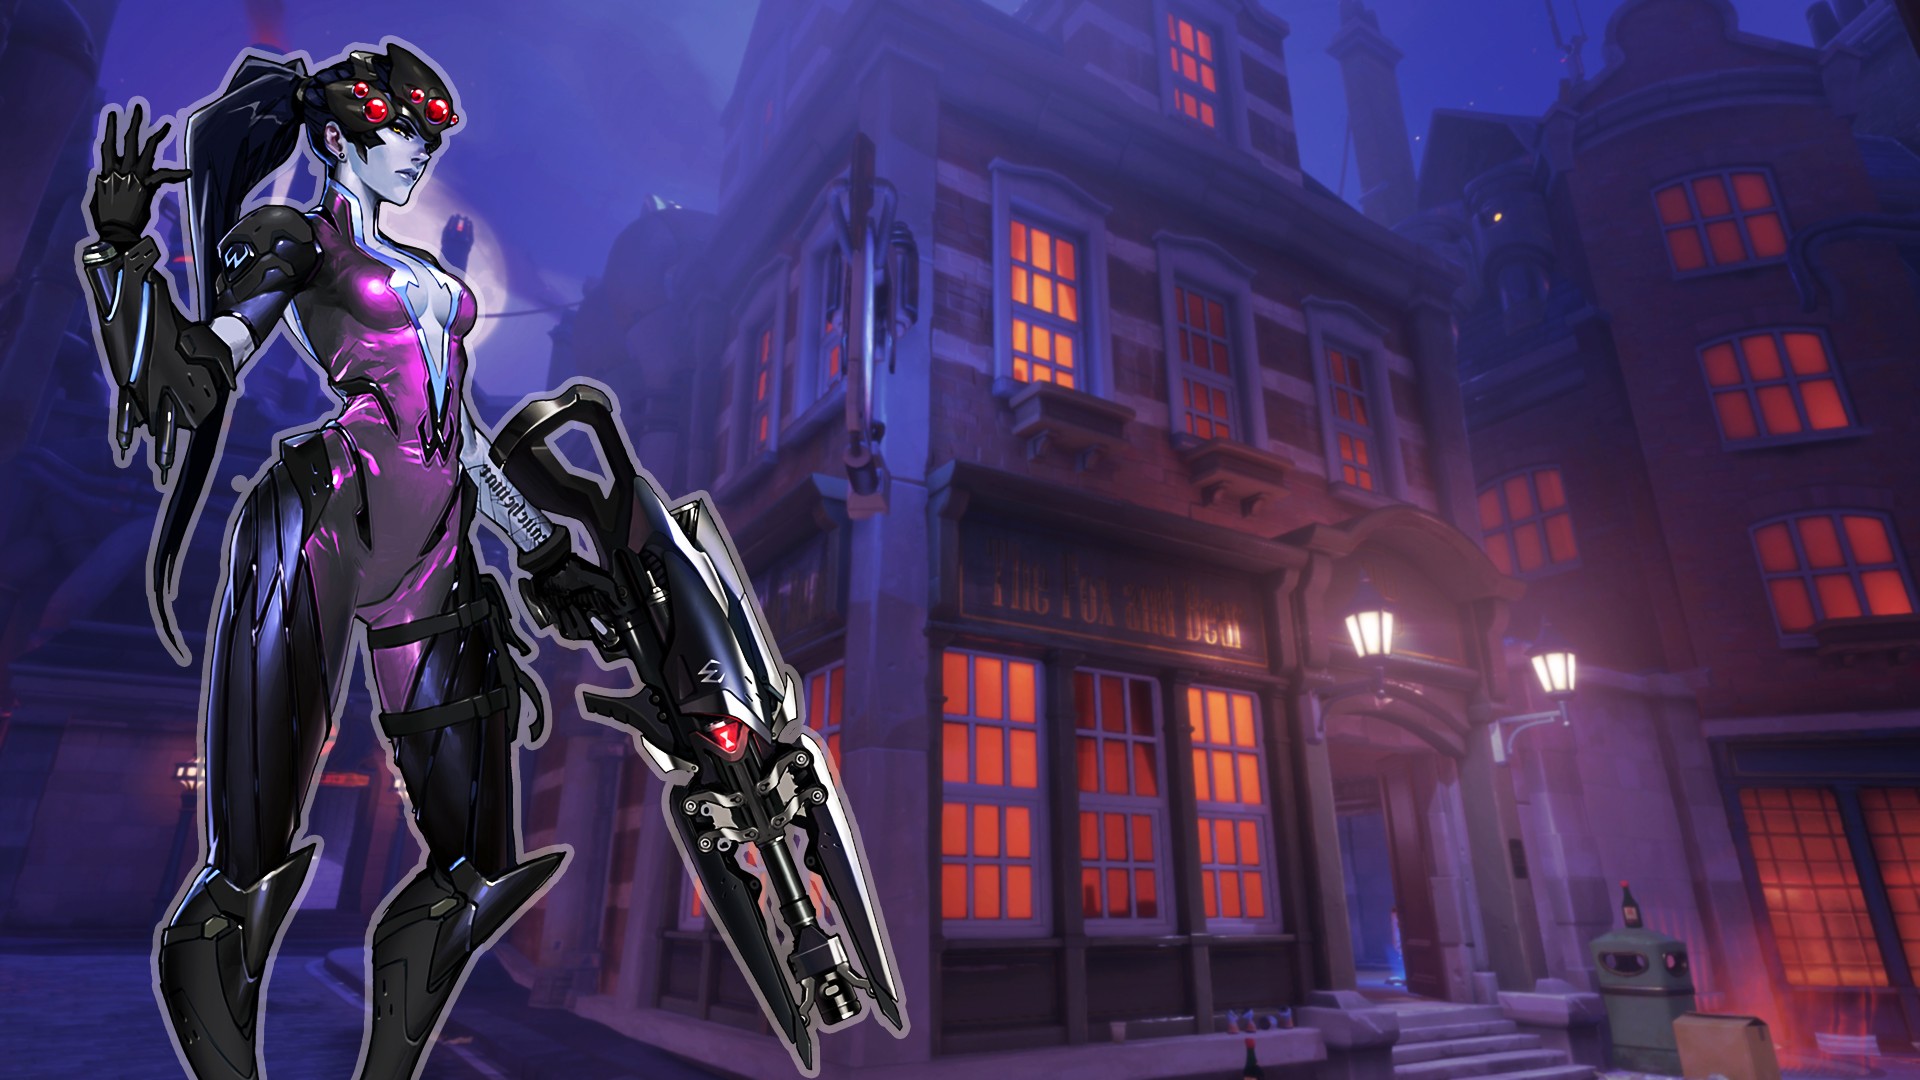 General 1920x1080 Overwatch Blizzard Entertainment video games livewirehd (Author) Widowmaker (Overwatch) PC gaming video game girls girls with guns weapon